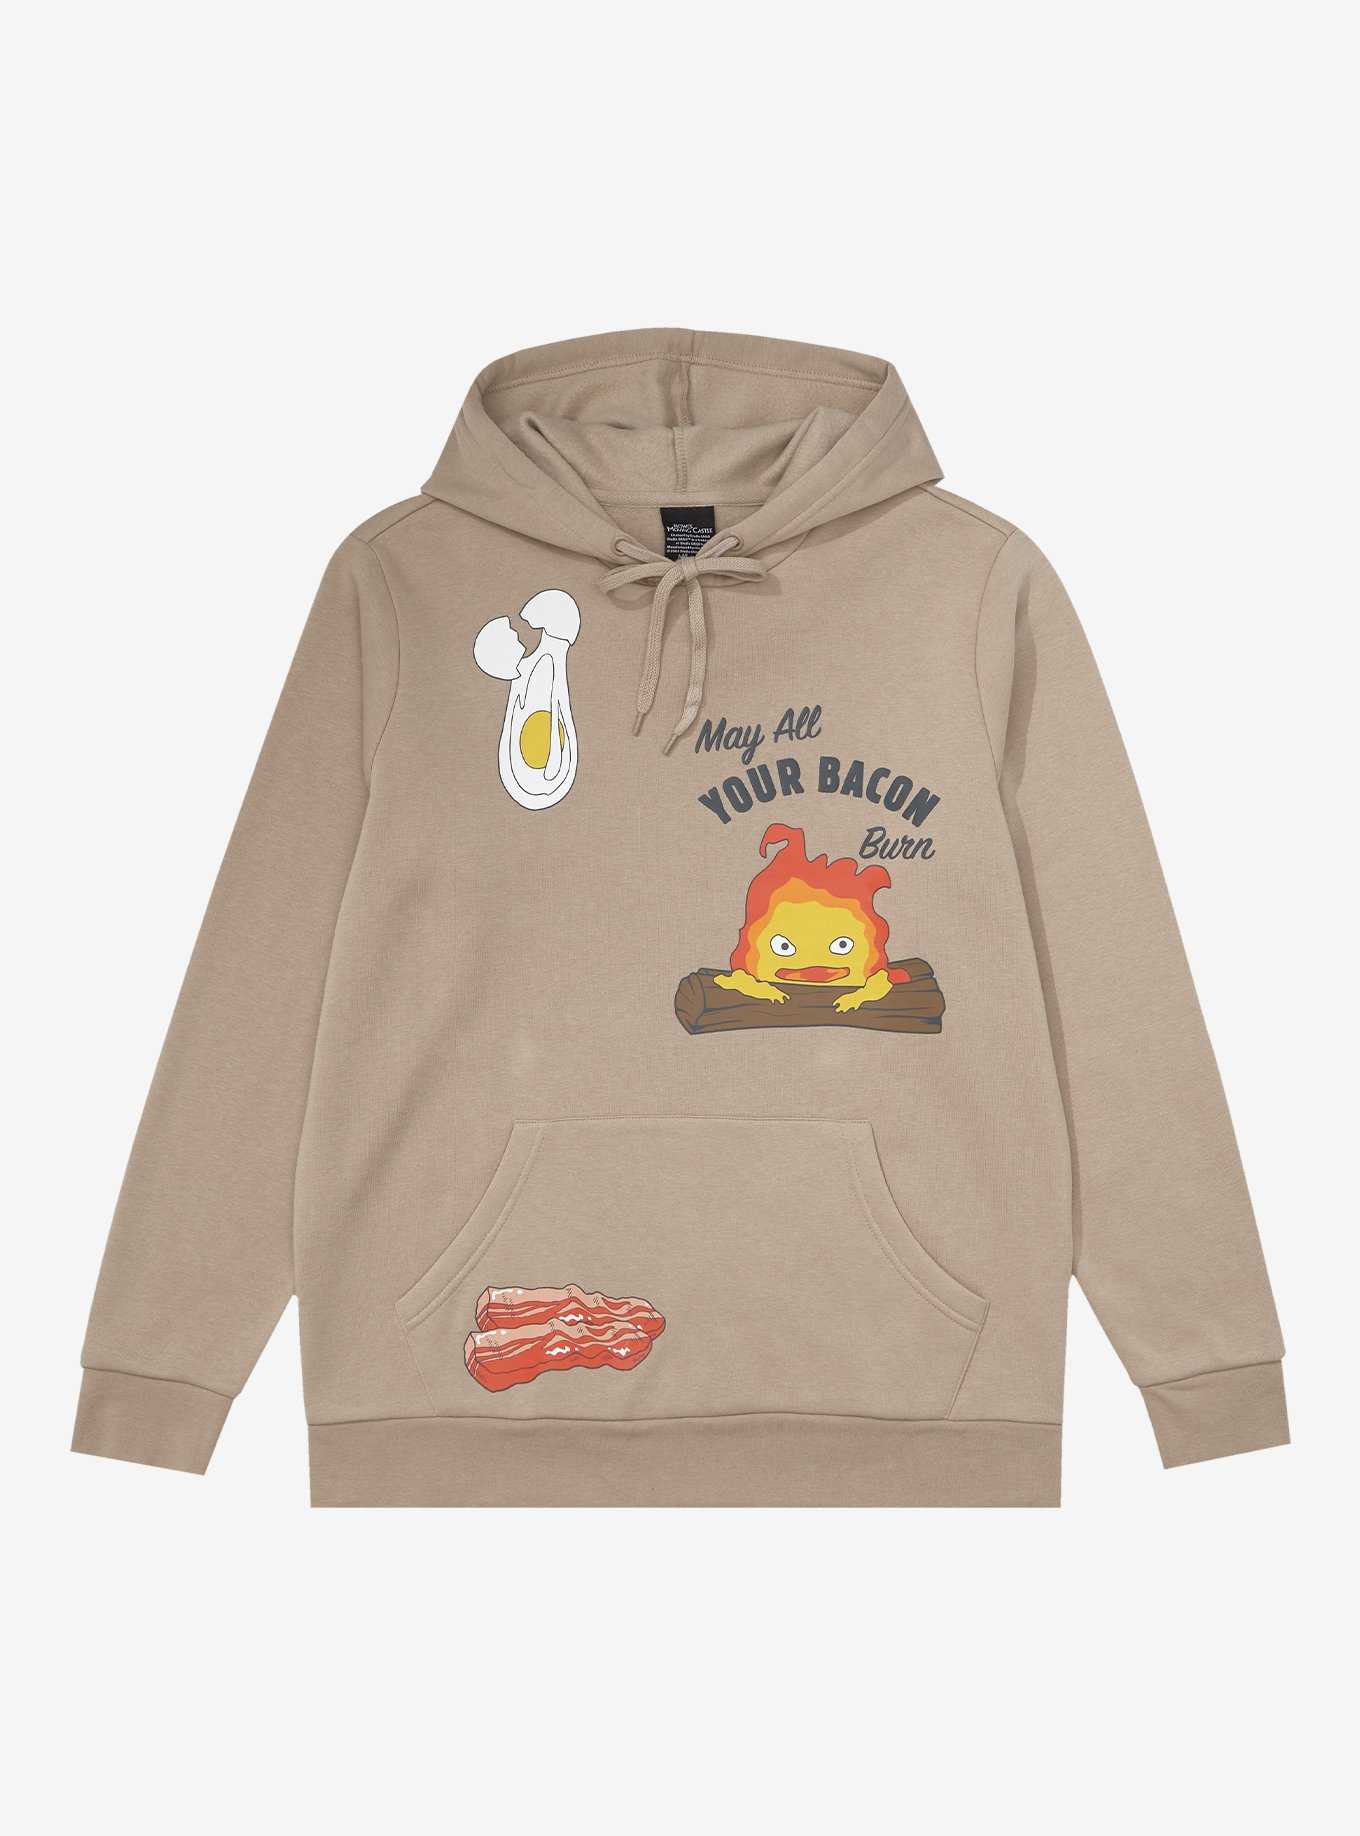 Studio Ghibli Howl's Moving Castle Calcifer Bacon Hoodie - BoxLunch Exclusive, , hi-res